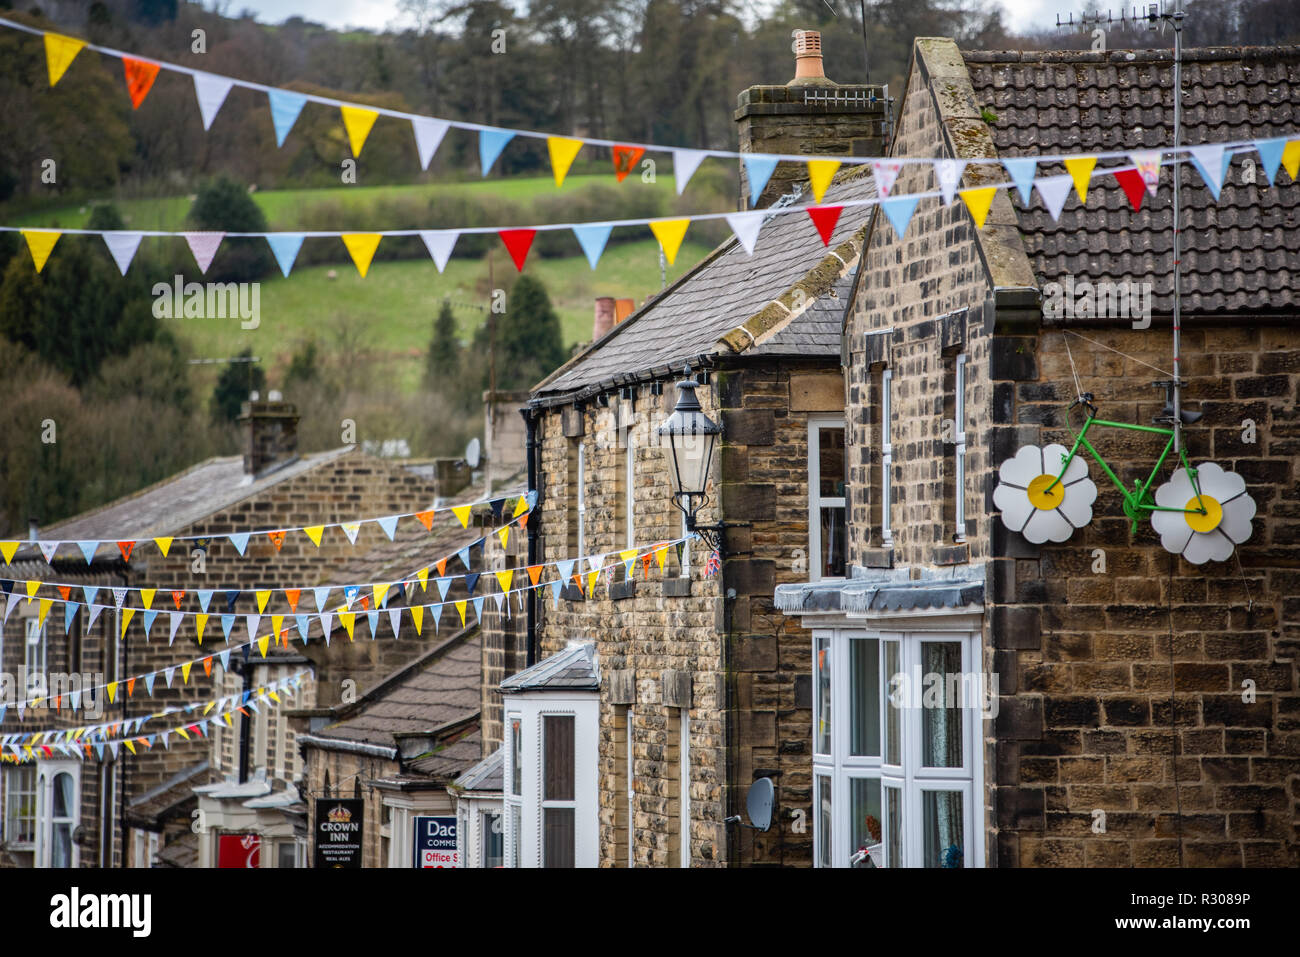 Colourful bunting hangs over the high street in Pateley Bridge in Nidderdale in the Borough of Harrogate, North Yorkshire, England Stock Photo